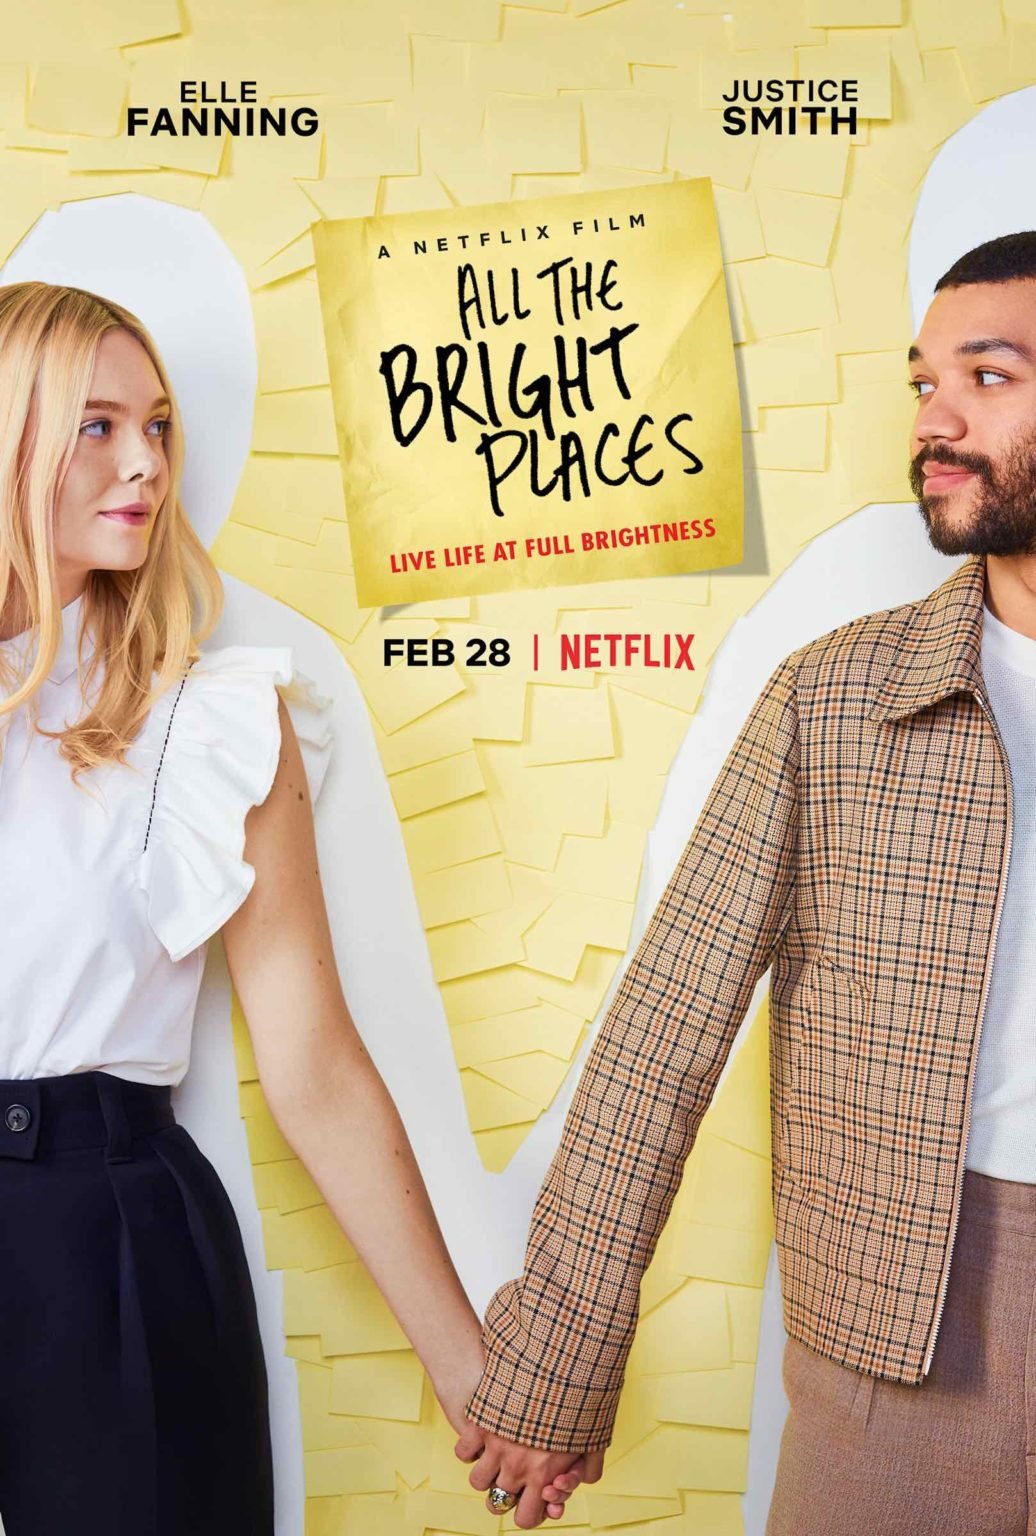 Coming to Netflix this month, 'All the Bright Places' is the new romantic drama directed by Brett Haley. Here's everything we know.